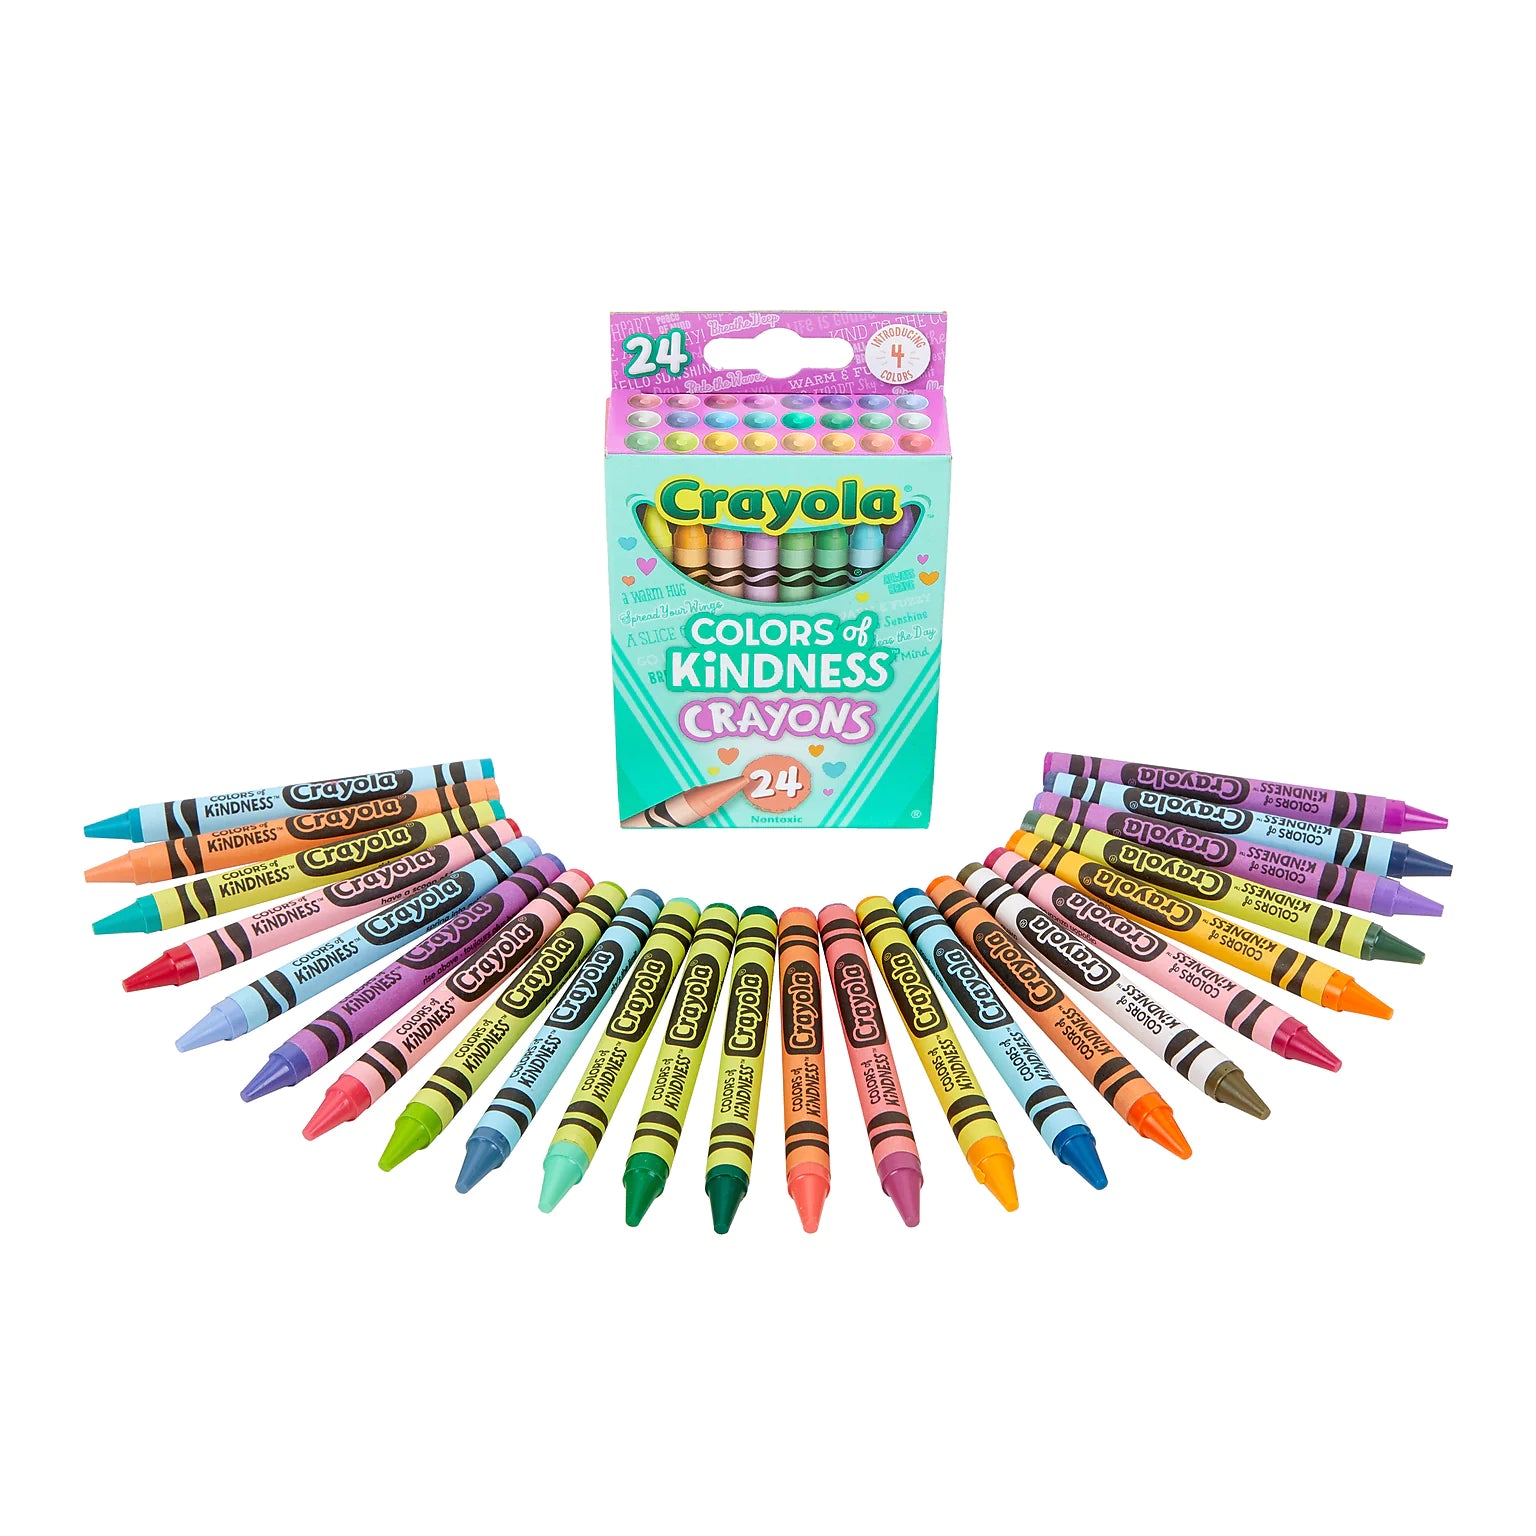  Crayola 24 Count Box of Crayons Non-Toxic Color Coloring School  Supplies (2 Packs) : Toys & Games